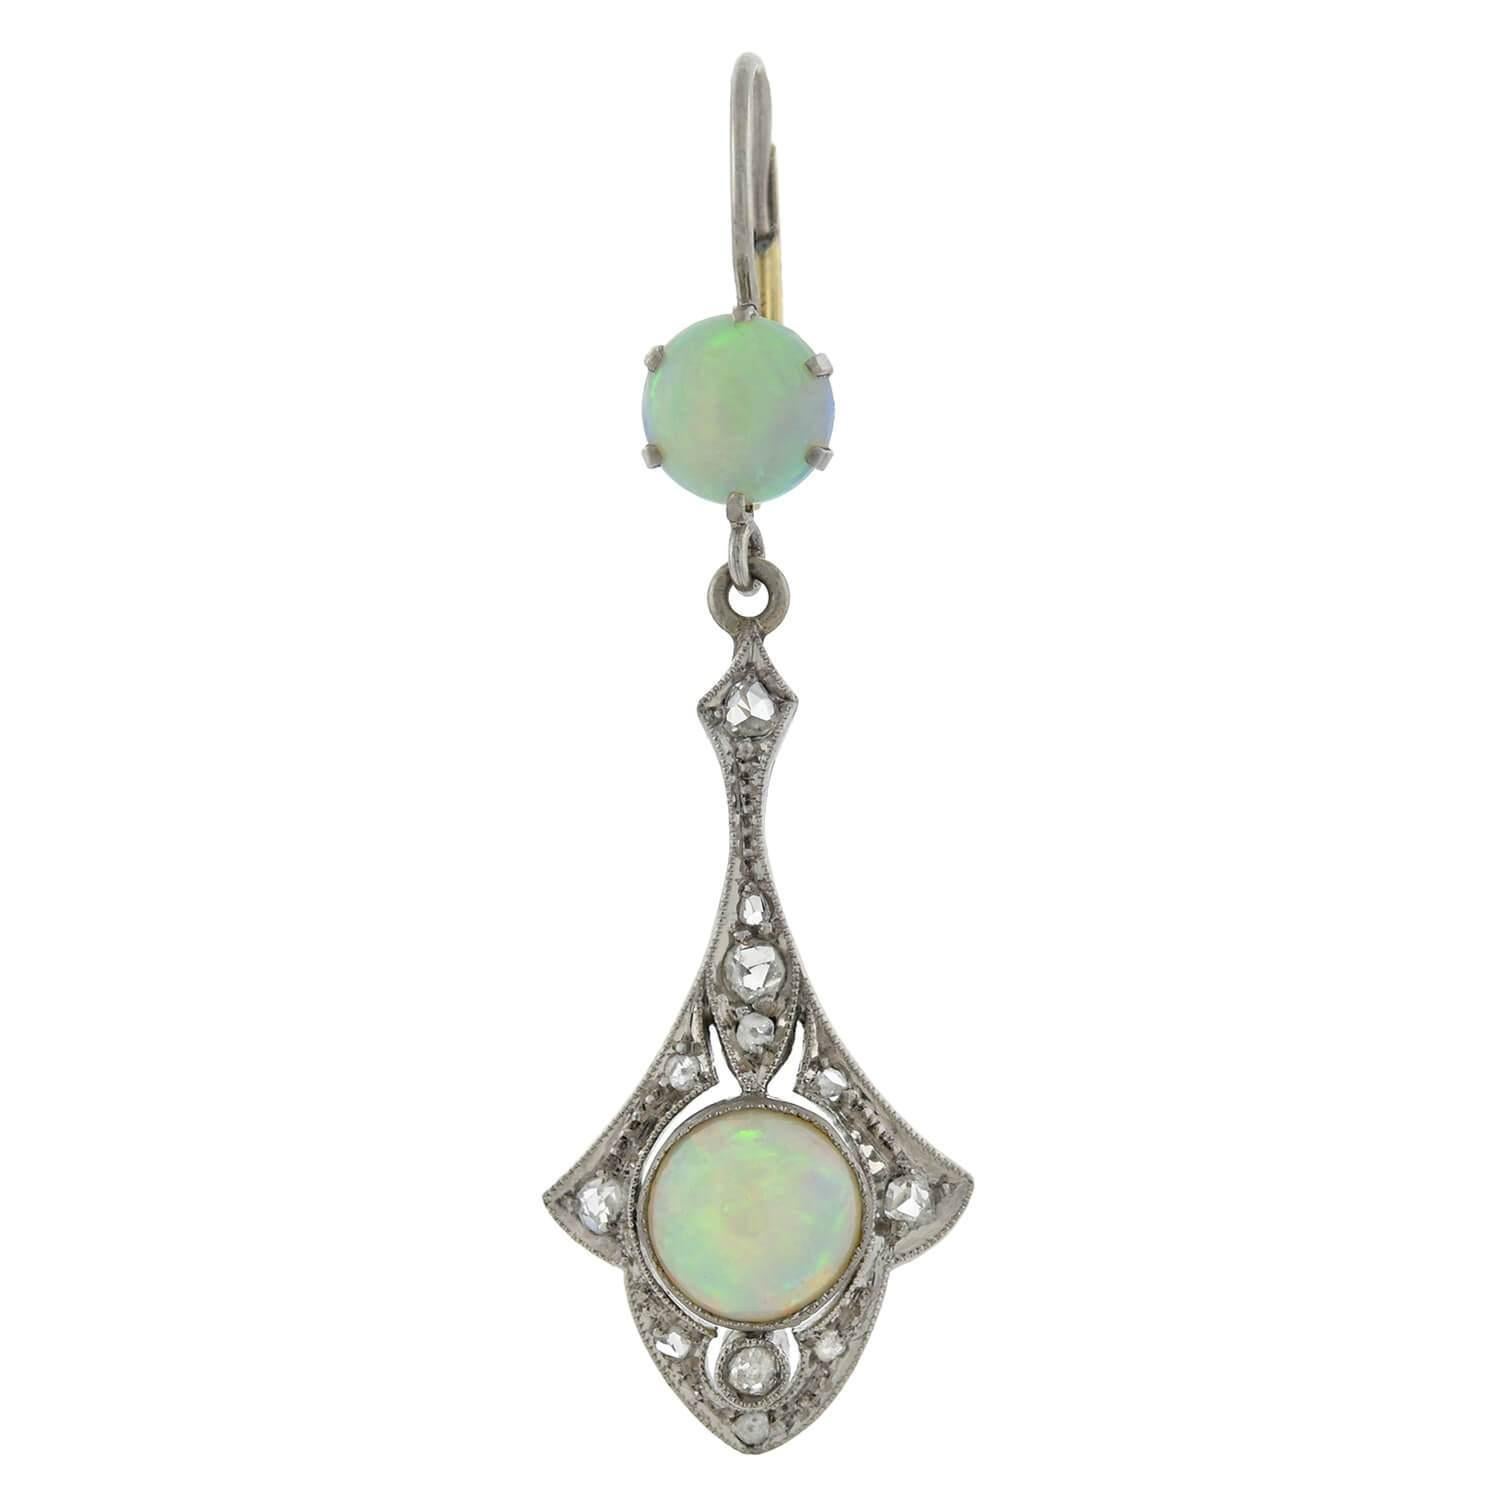 A gorgeous pair of opal earrings from the Art Deco (1920s) era! Crafted in 14kt white gold, each earring features two vibrant opals and an array of sparkling old Rose Cut diamonds. The earrings dangle from 14kt white and yellow gold lever back wires